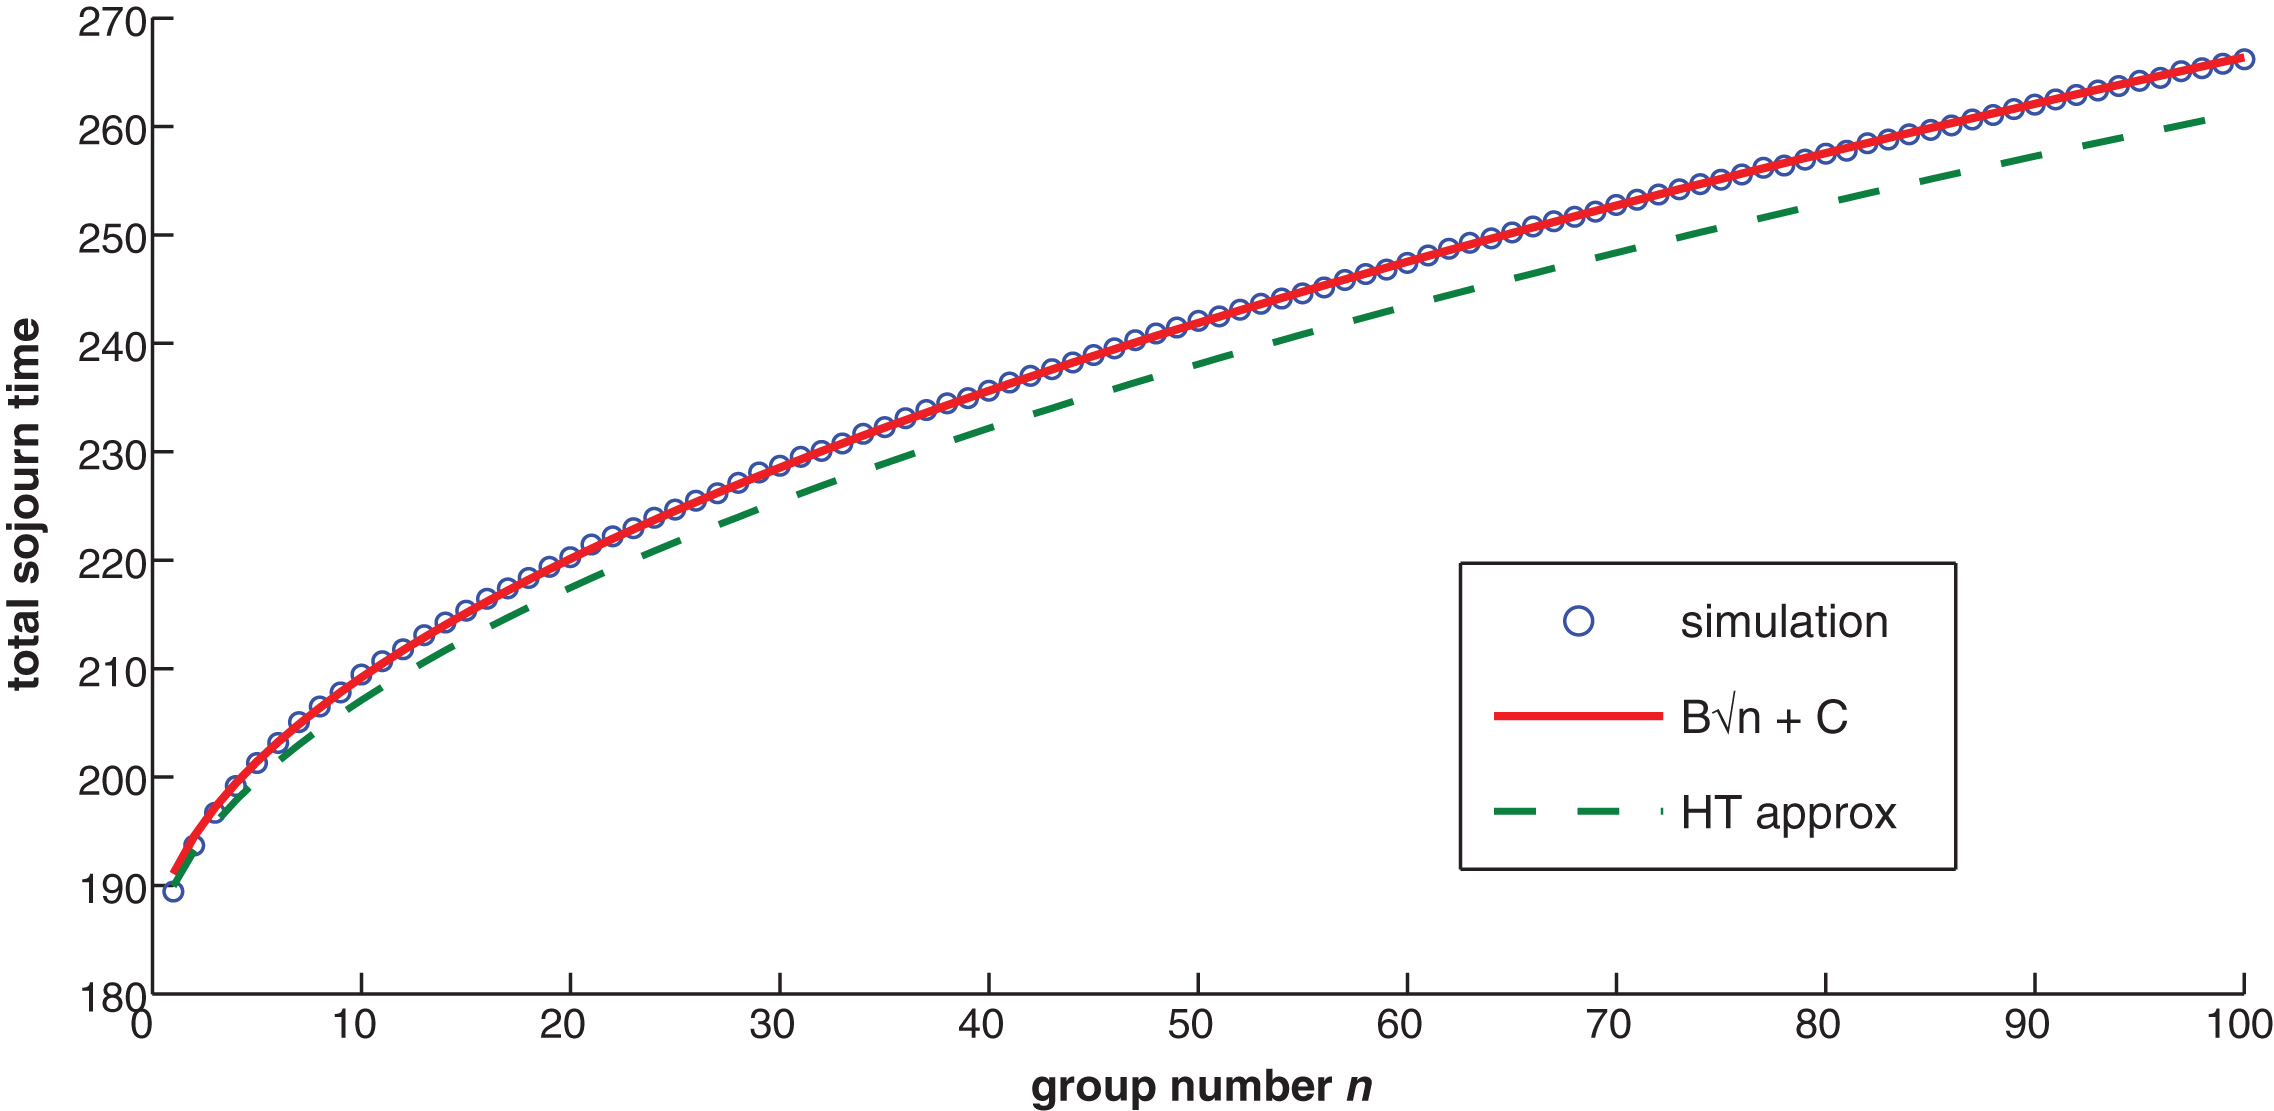 The heavy-traffic approximation in (1) (8.04n+181.6), developed in §4, and the two-parameter 
fit to the simulation estimates (8.32n+182) compared to the simulation estimates of E [V18,n], the 
expected time for group n to play all 18 holes, as a function of n, for a critically loaded golf course 
model with identical par-4 holes, with all stage playing times having the triangular distribution, modified to 
allow lost balls, with parameter five tuple (m, a, r, p, L) = (4, 1.5, 0.5, 0.05, 8.0), specified in §3.1.